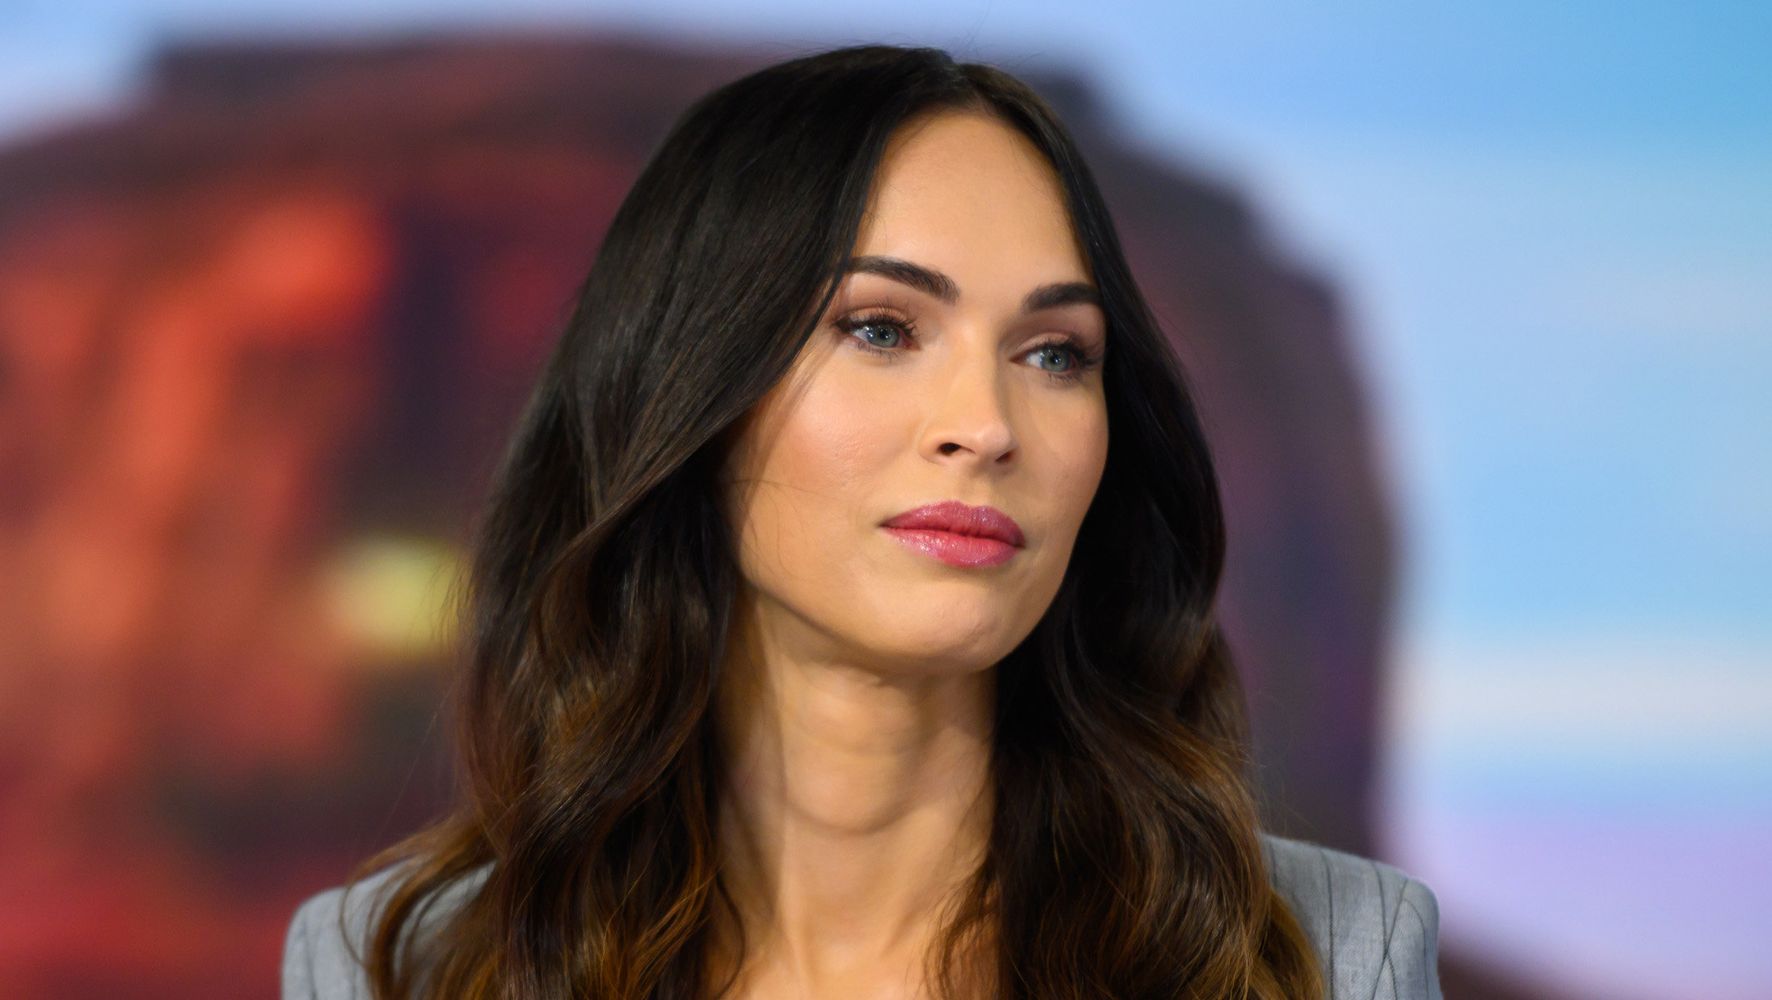 Megan Fox Faces Backlash Over Controversial Comment On Social Media